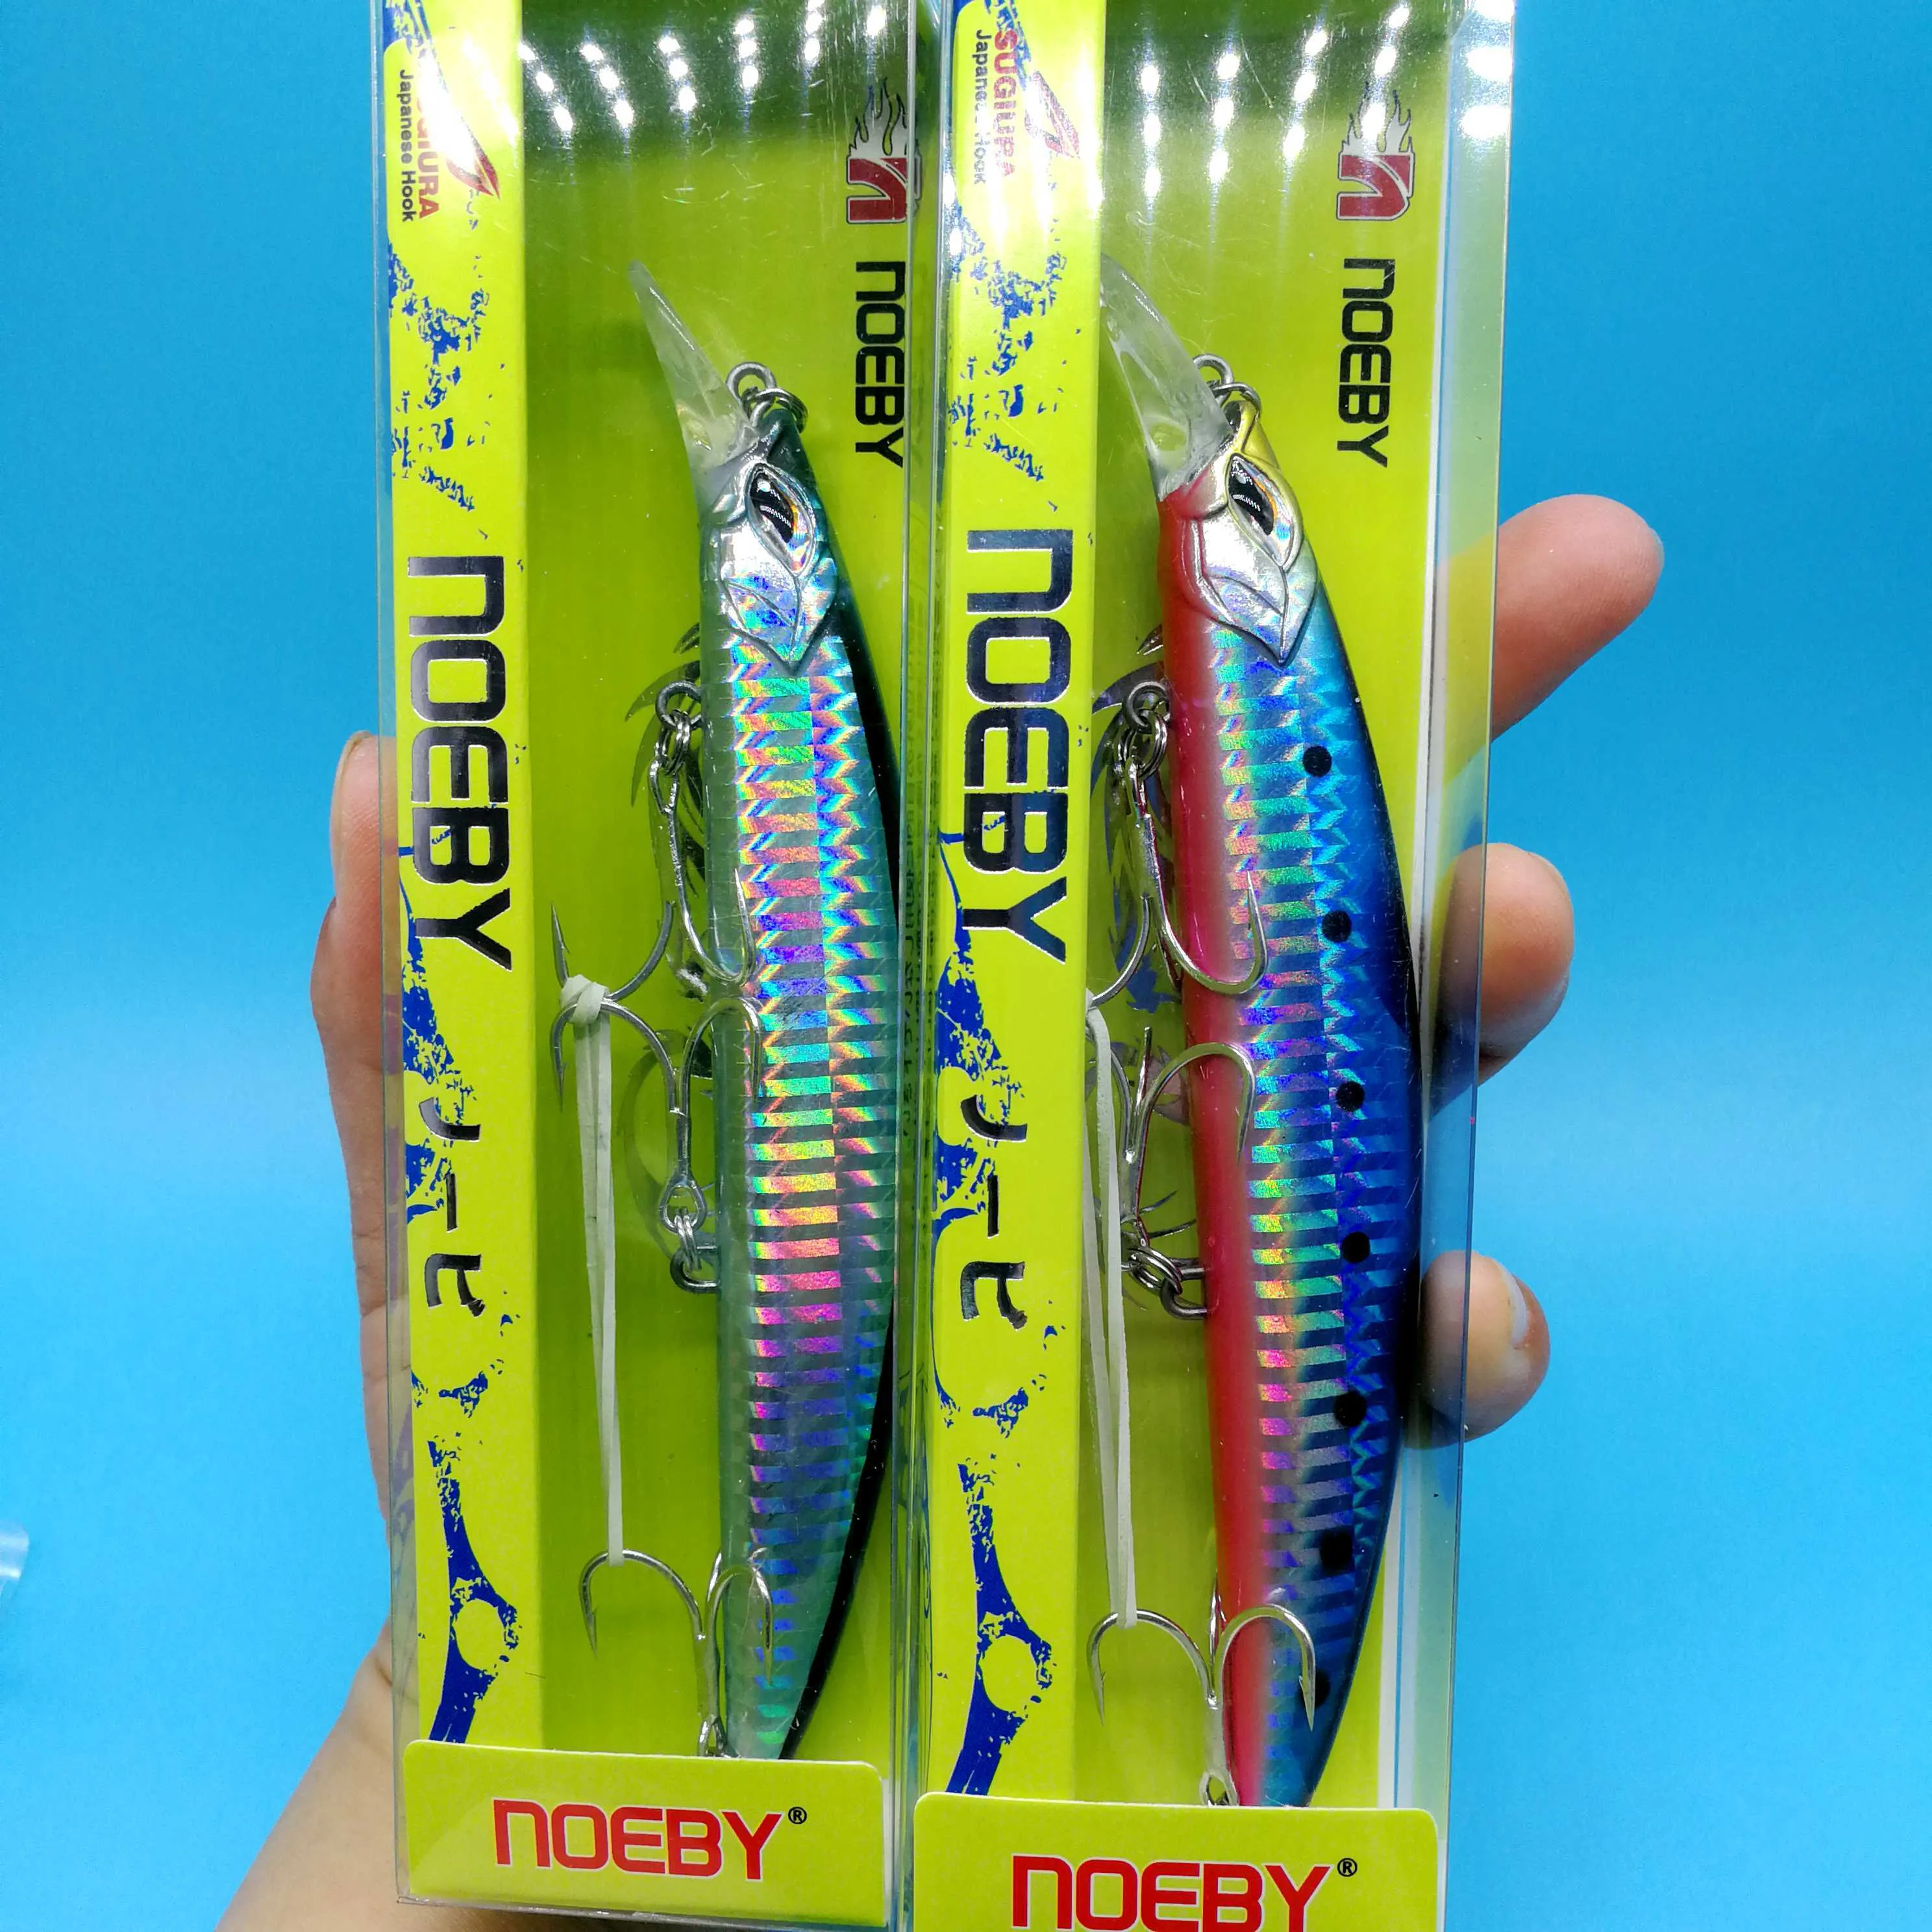 NOEBY 2019 Floating Minnow Rainbow Trout Lures Set 23g, 130mm, 0 1.5m Depth,  Wobbler Hard Bait For Saltwater Fishing Tackle T20274g From Fed26, $21.7